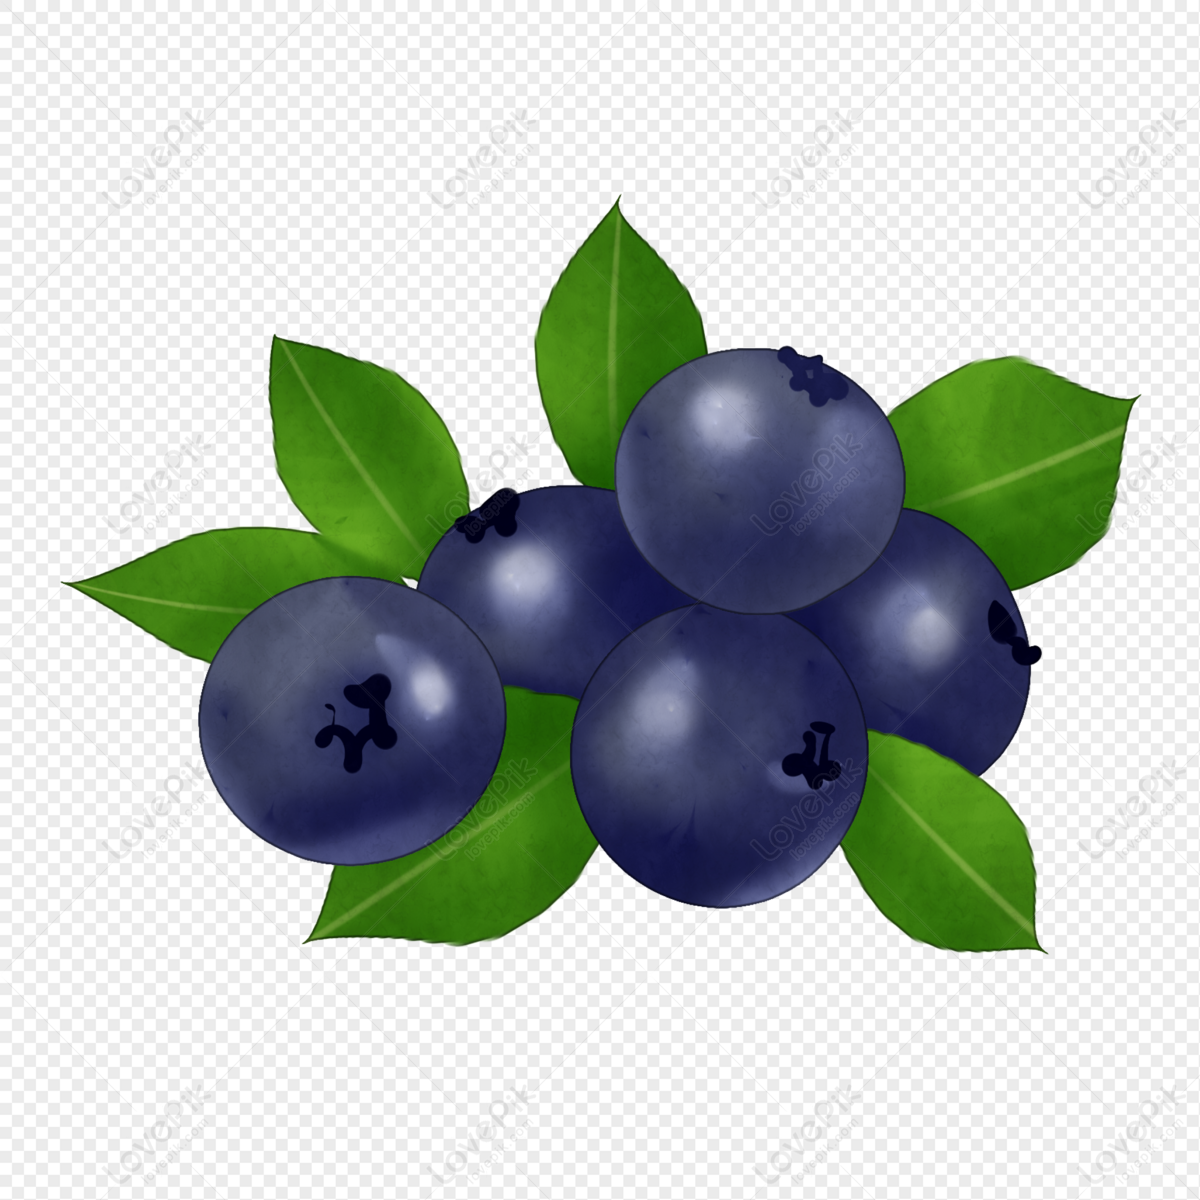 blueberries clipart